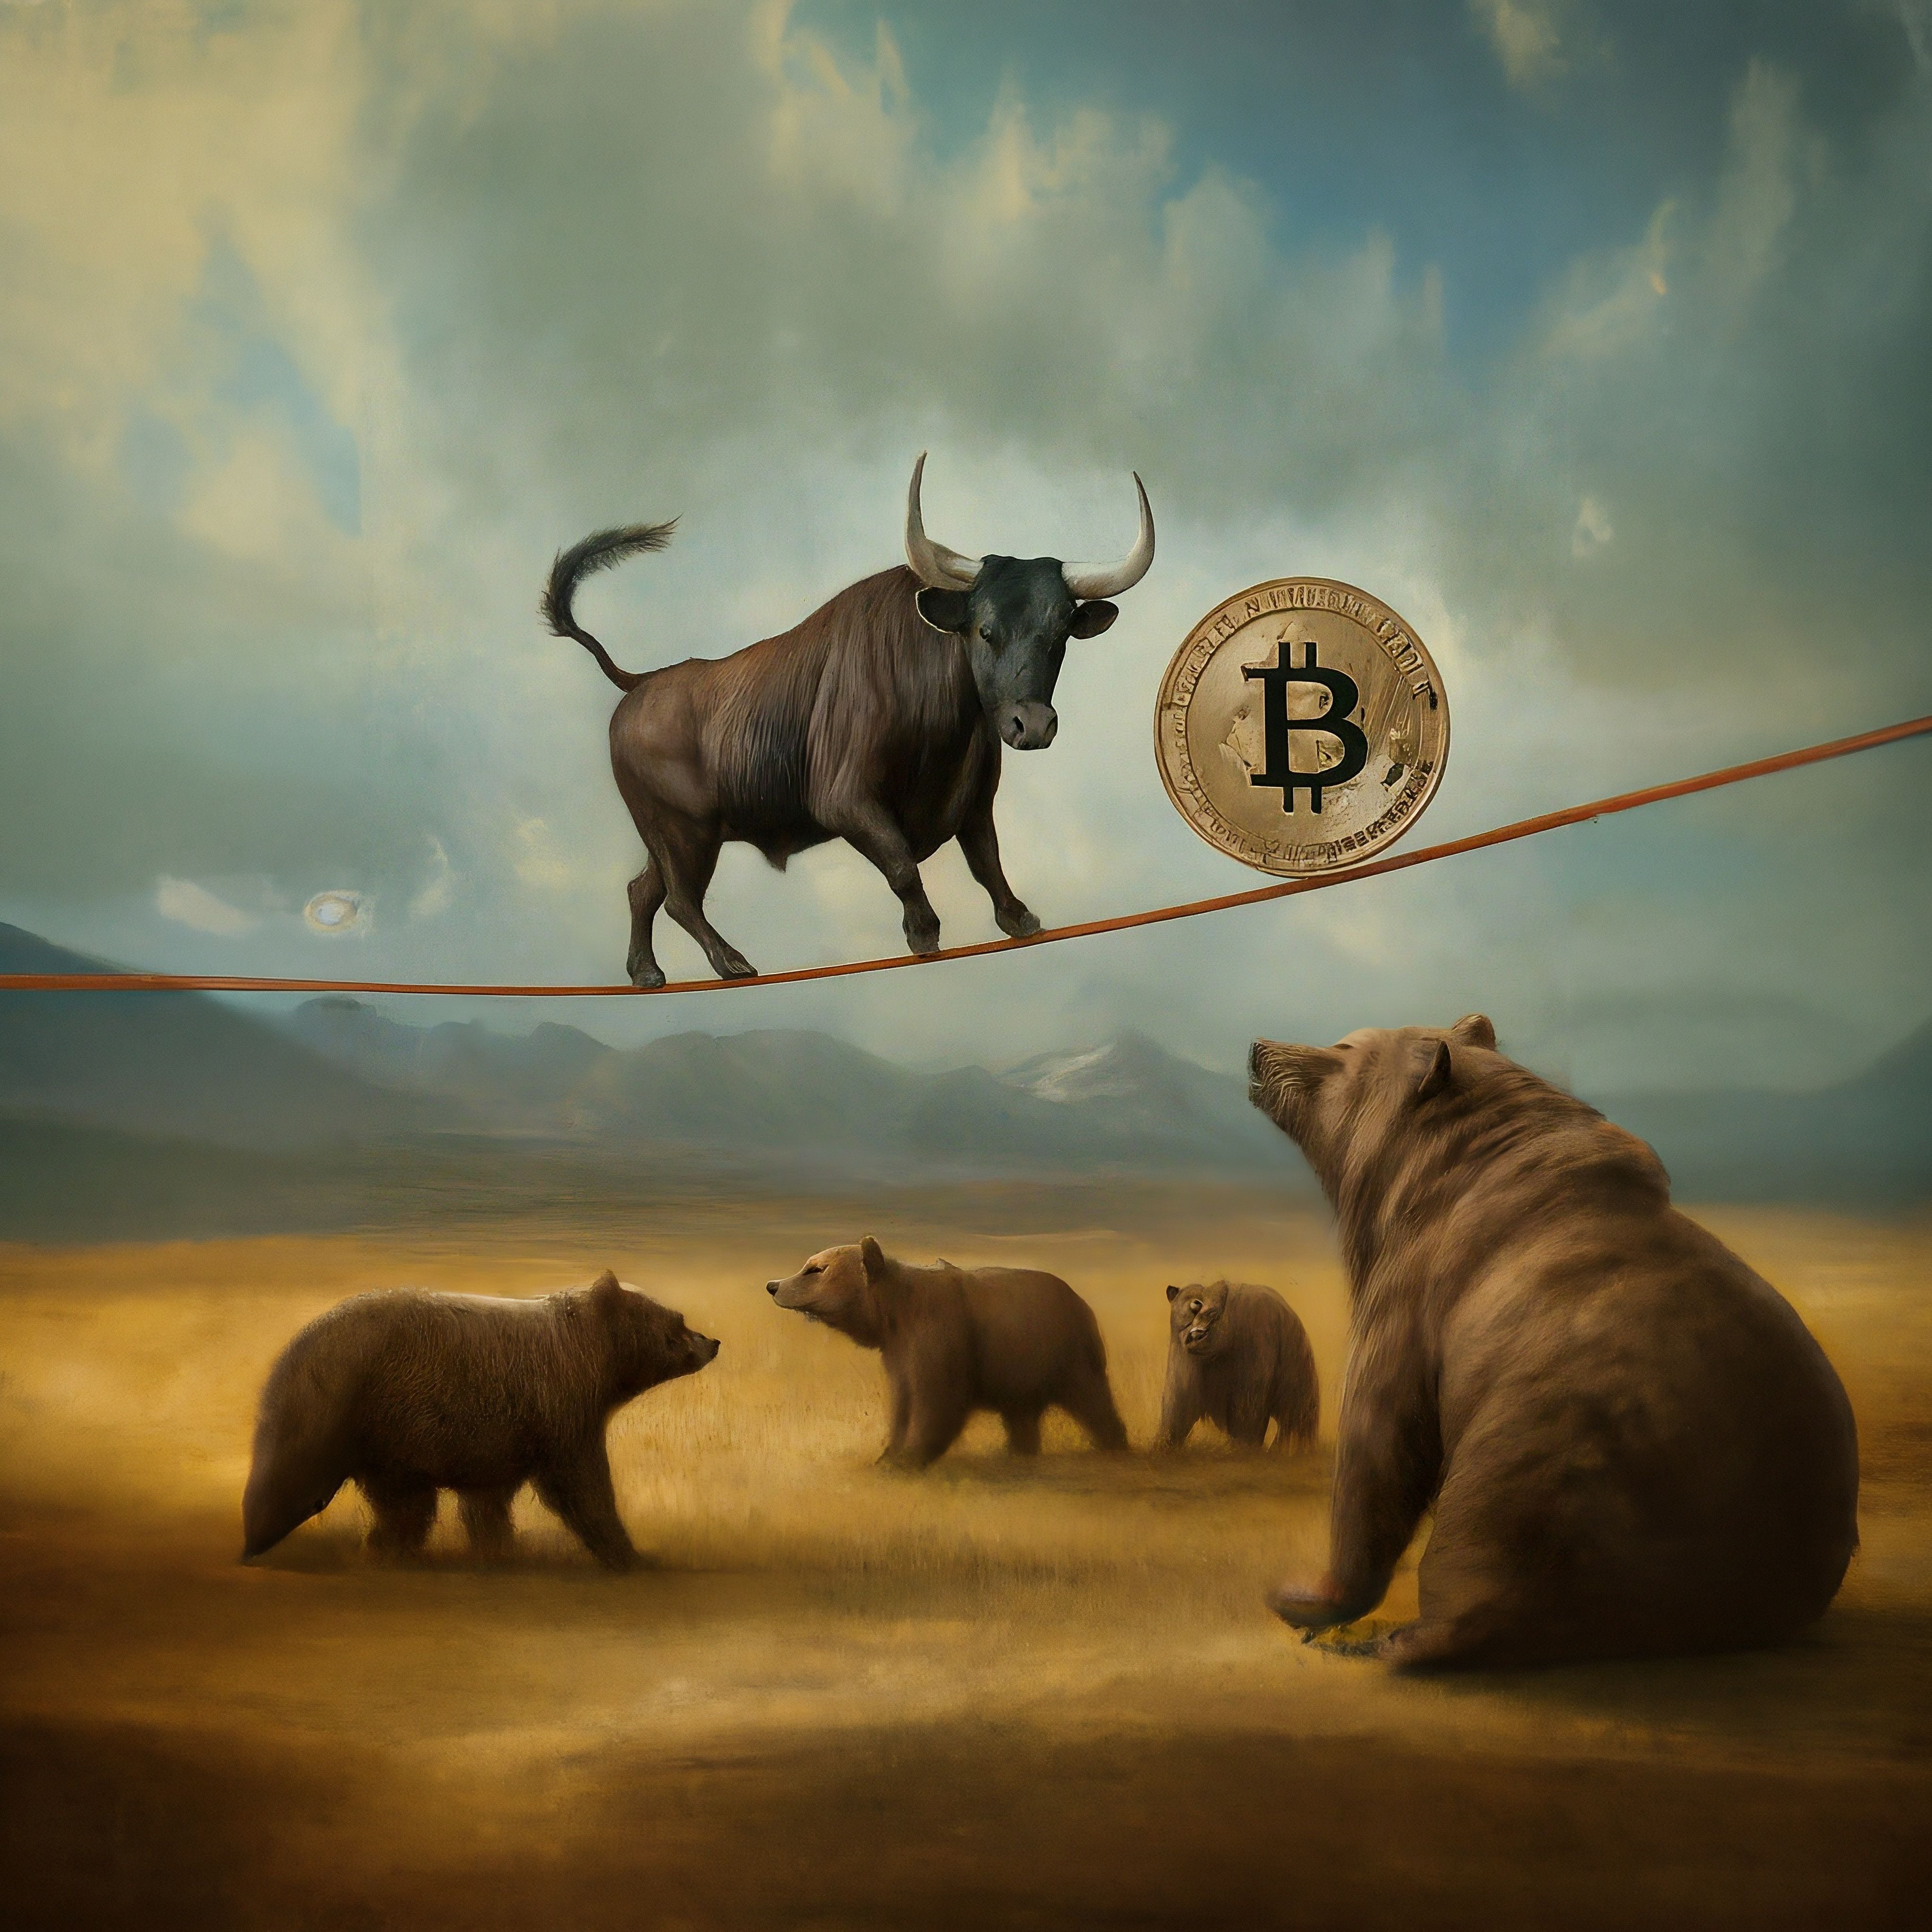 Bitcoin’s halving rally gives way to worries about geopolitical risks and the Fed’s rate move